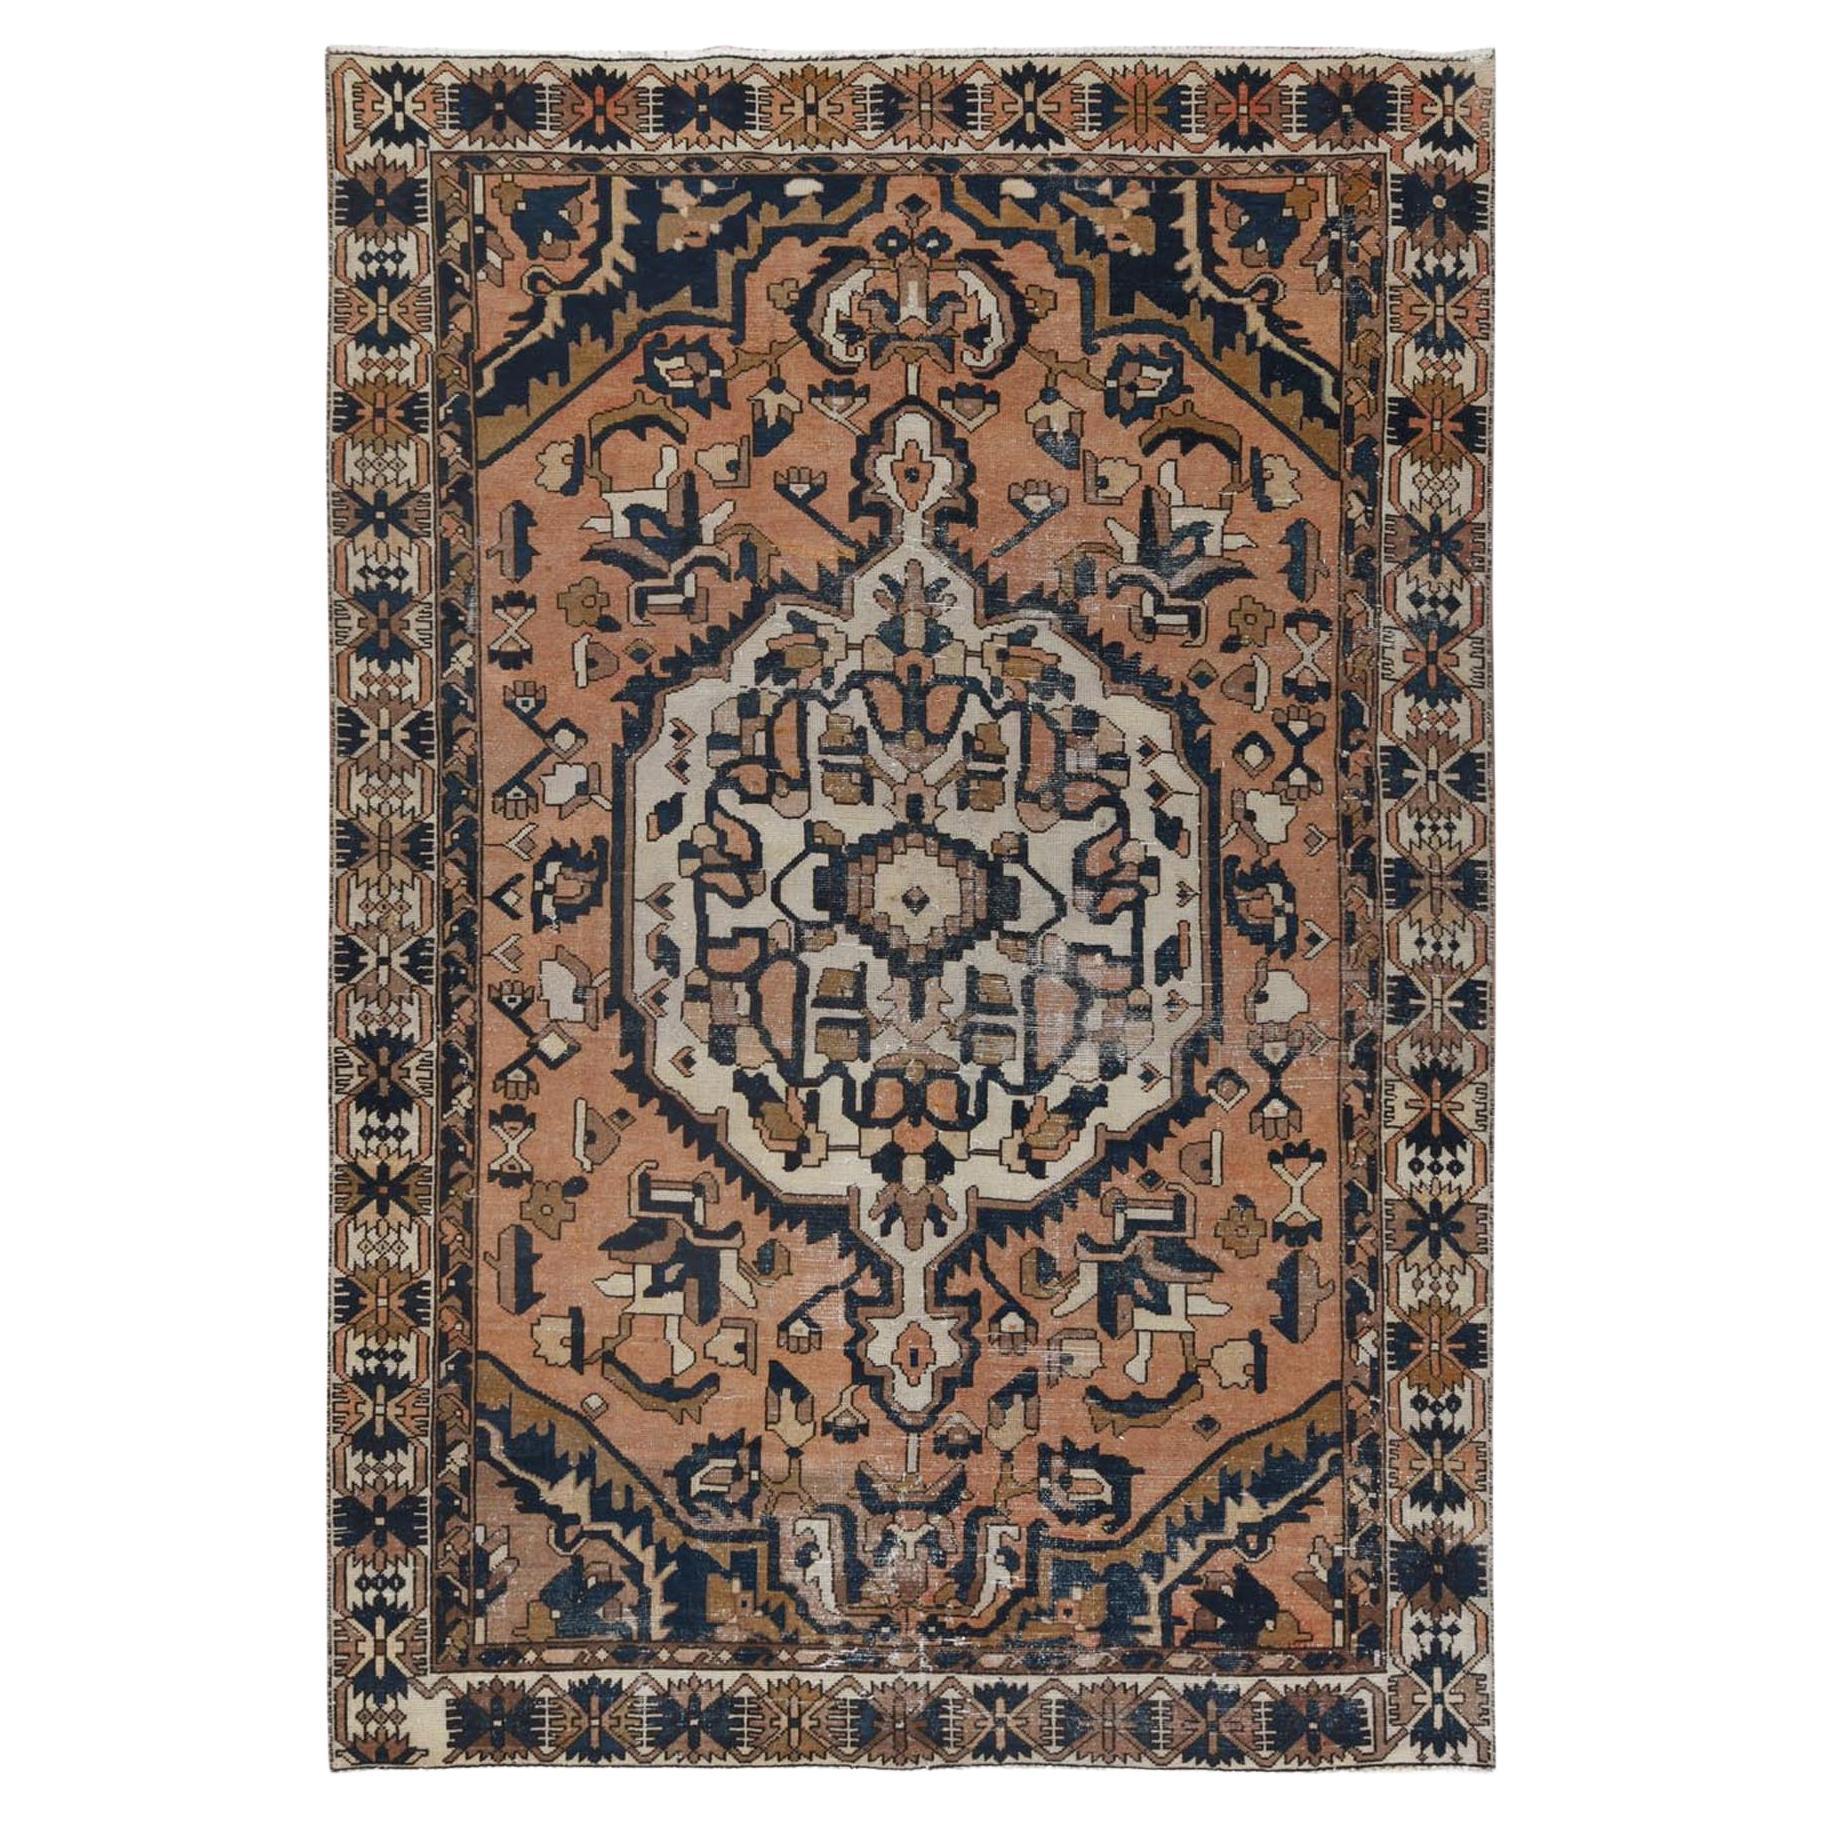 Apricot Color, Hand Knotted Vintage Northwest Persian, Worn Wool Distressed Rug